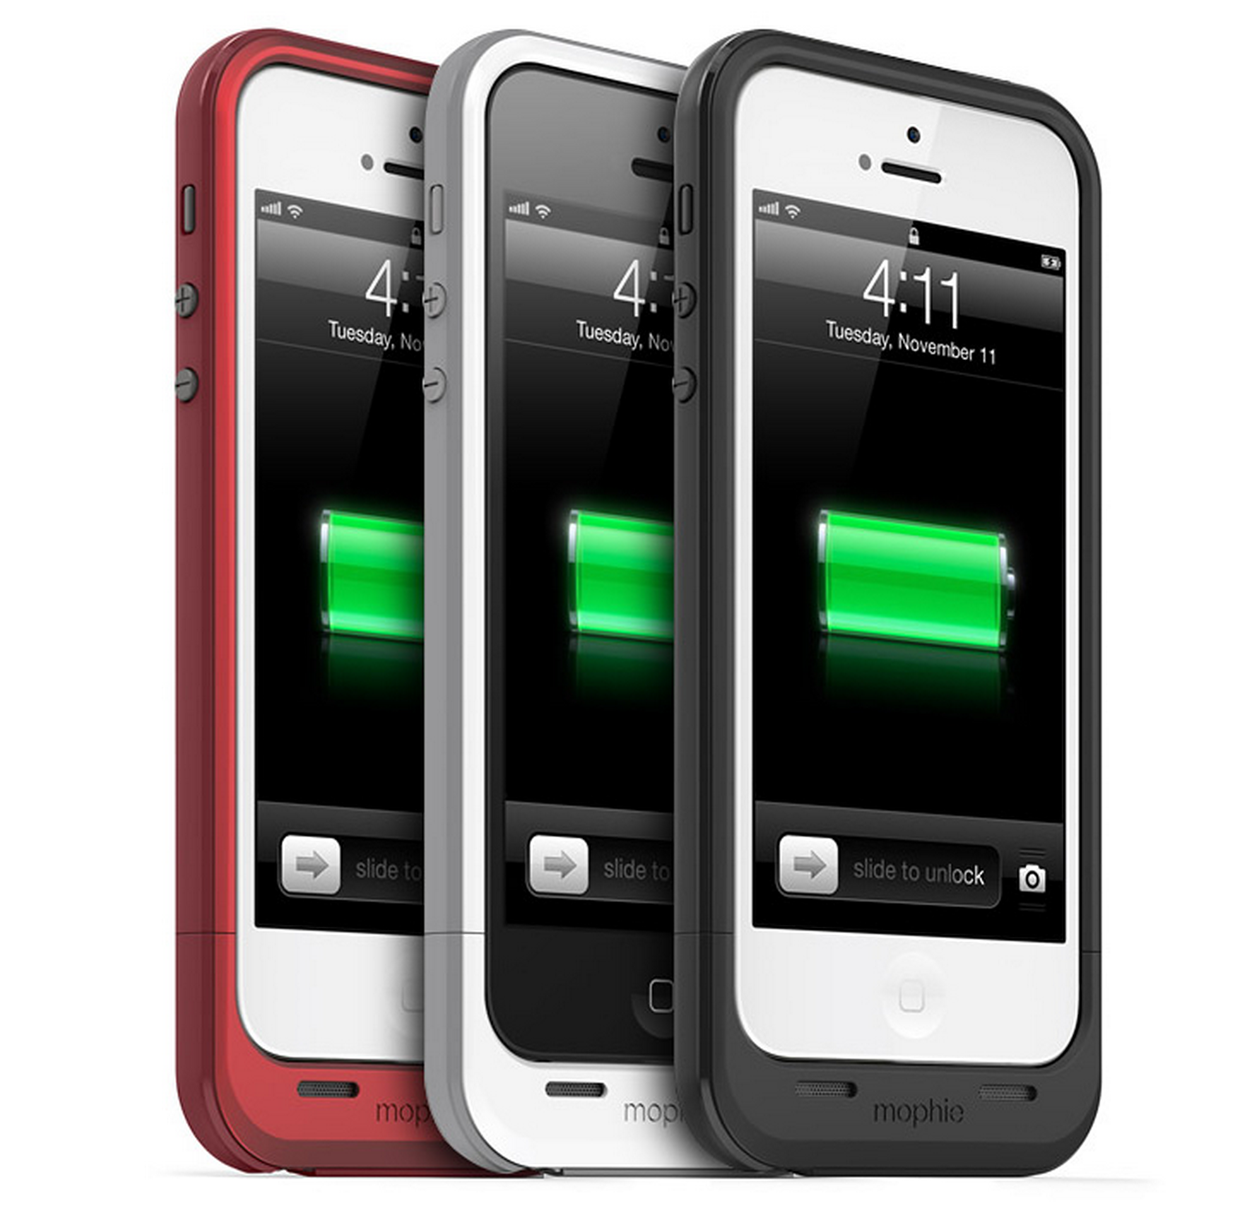 The Mophie Space Pack Makes Your iPhone 5s "Perfect" - Reviews - MyTechLogy